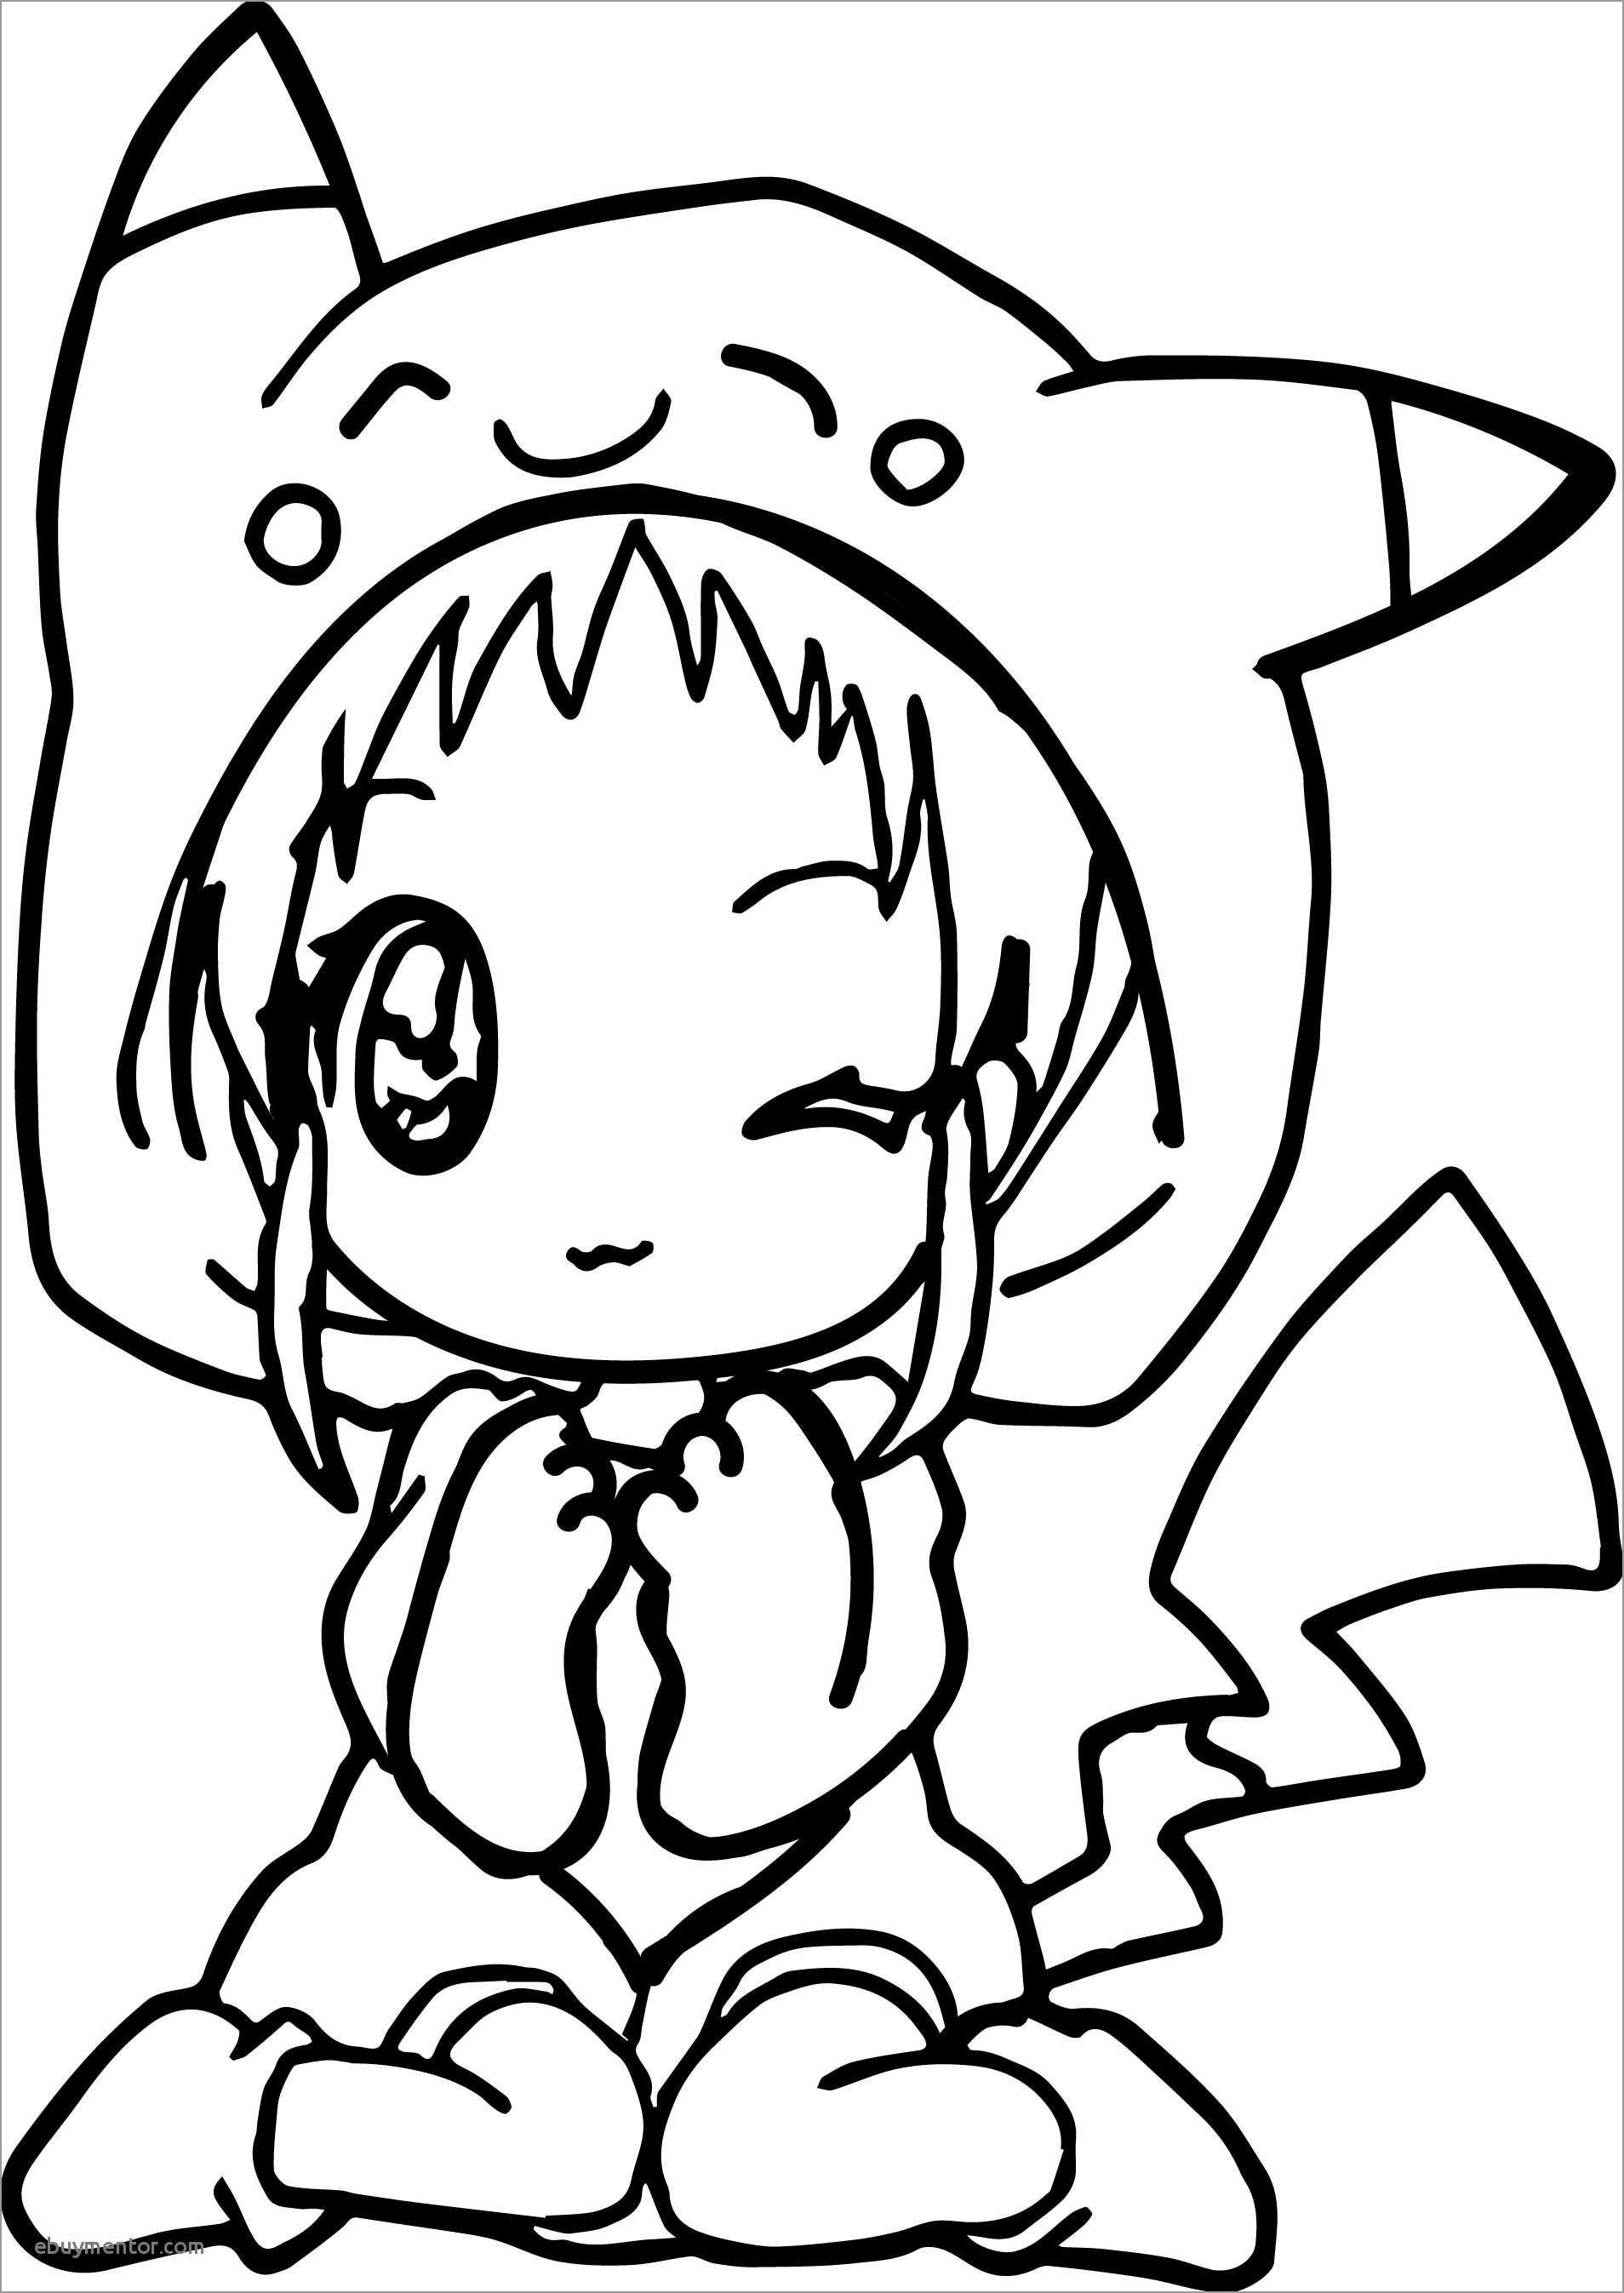 Cute Anime Chibi Girl Coloring Pages   ColoringBay